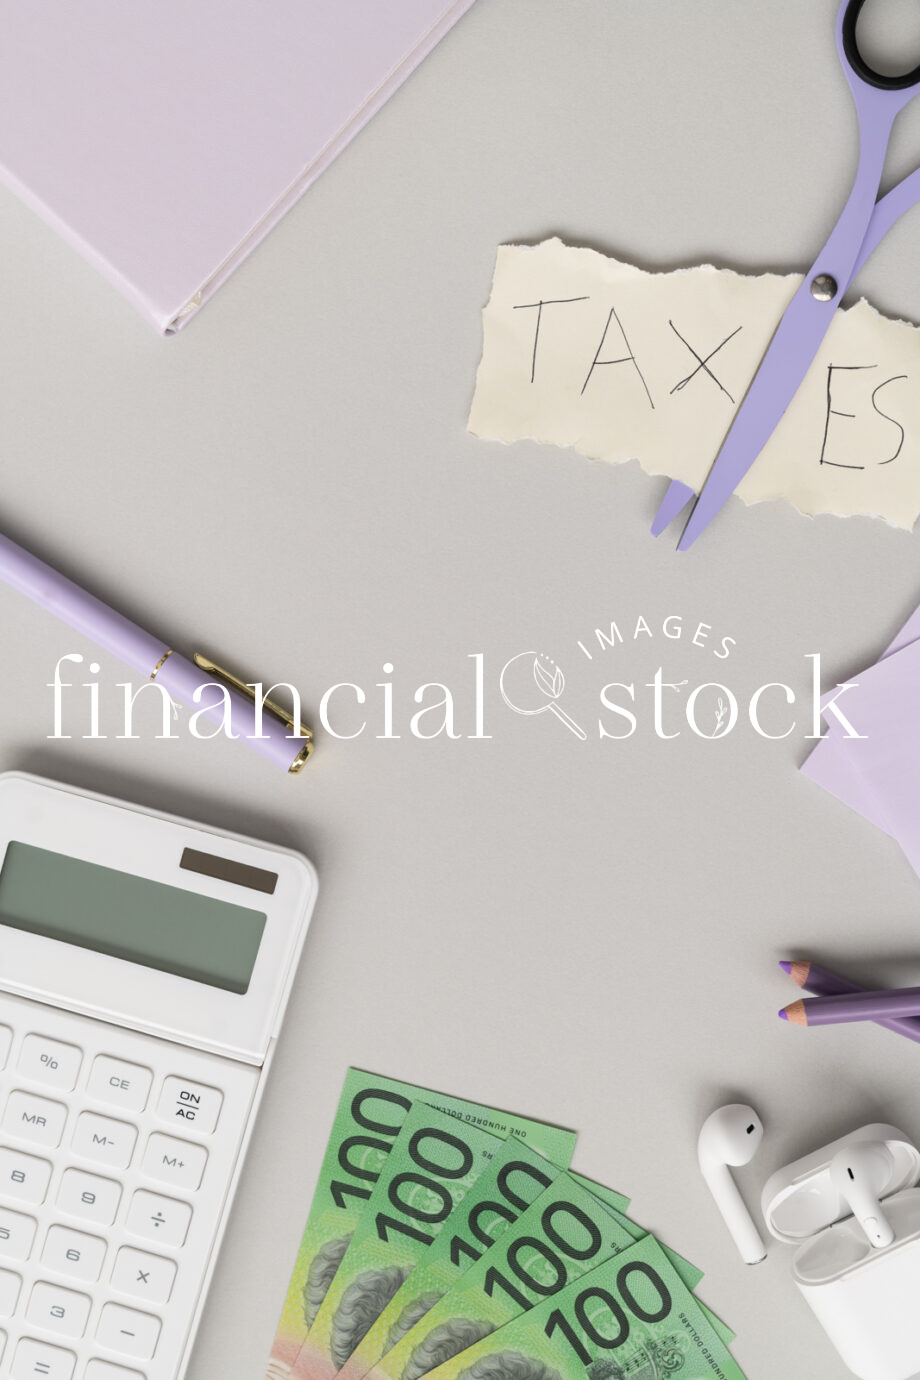 Financial, Stock, Images, Lilac, Office, Images, Money, Australian, Finance, Bookkeeper, Services, Business, Tax, Taxation